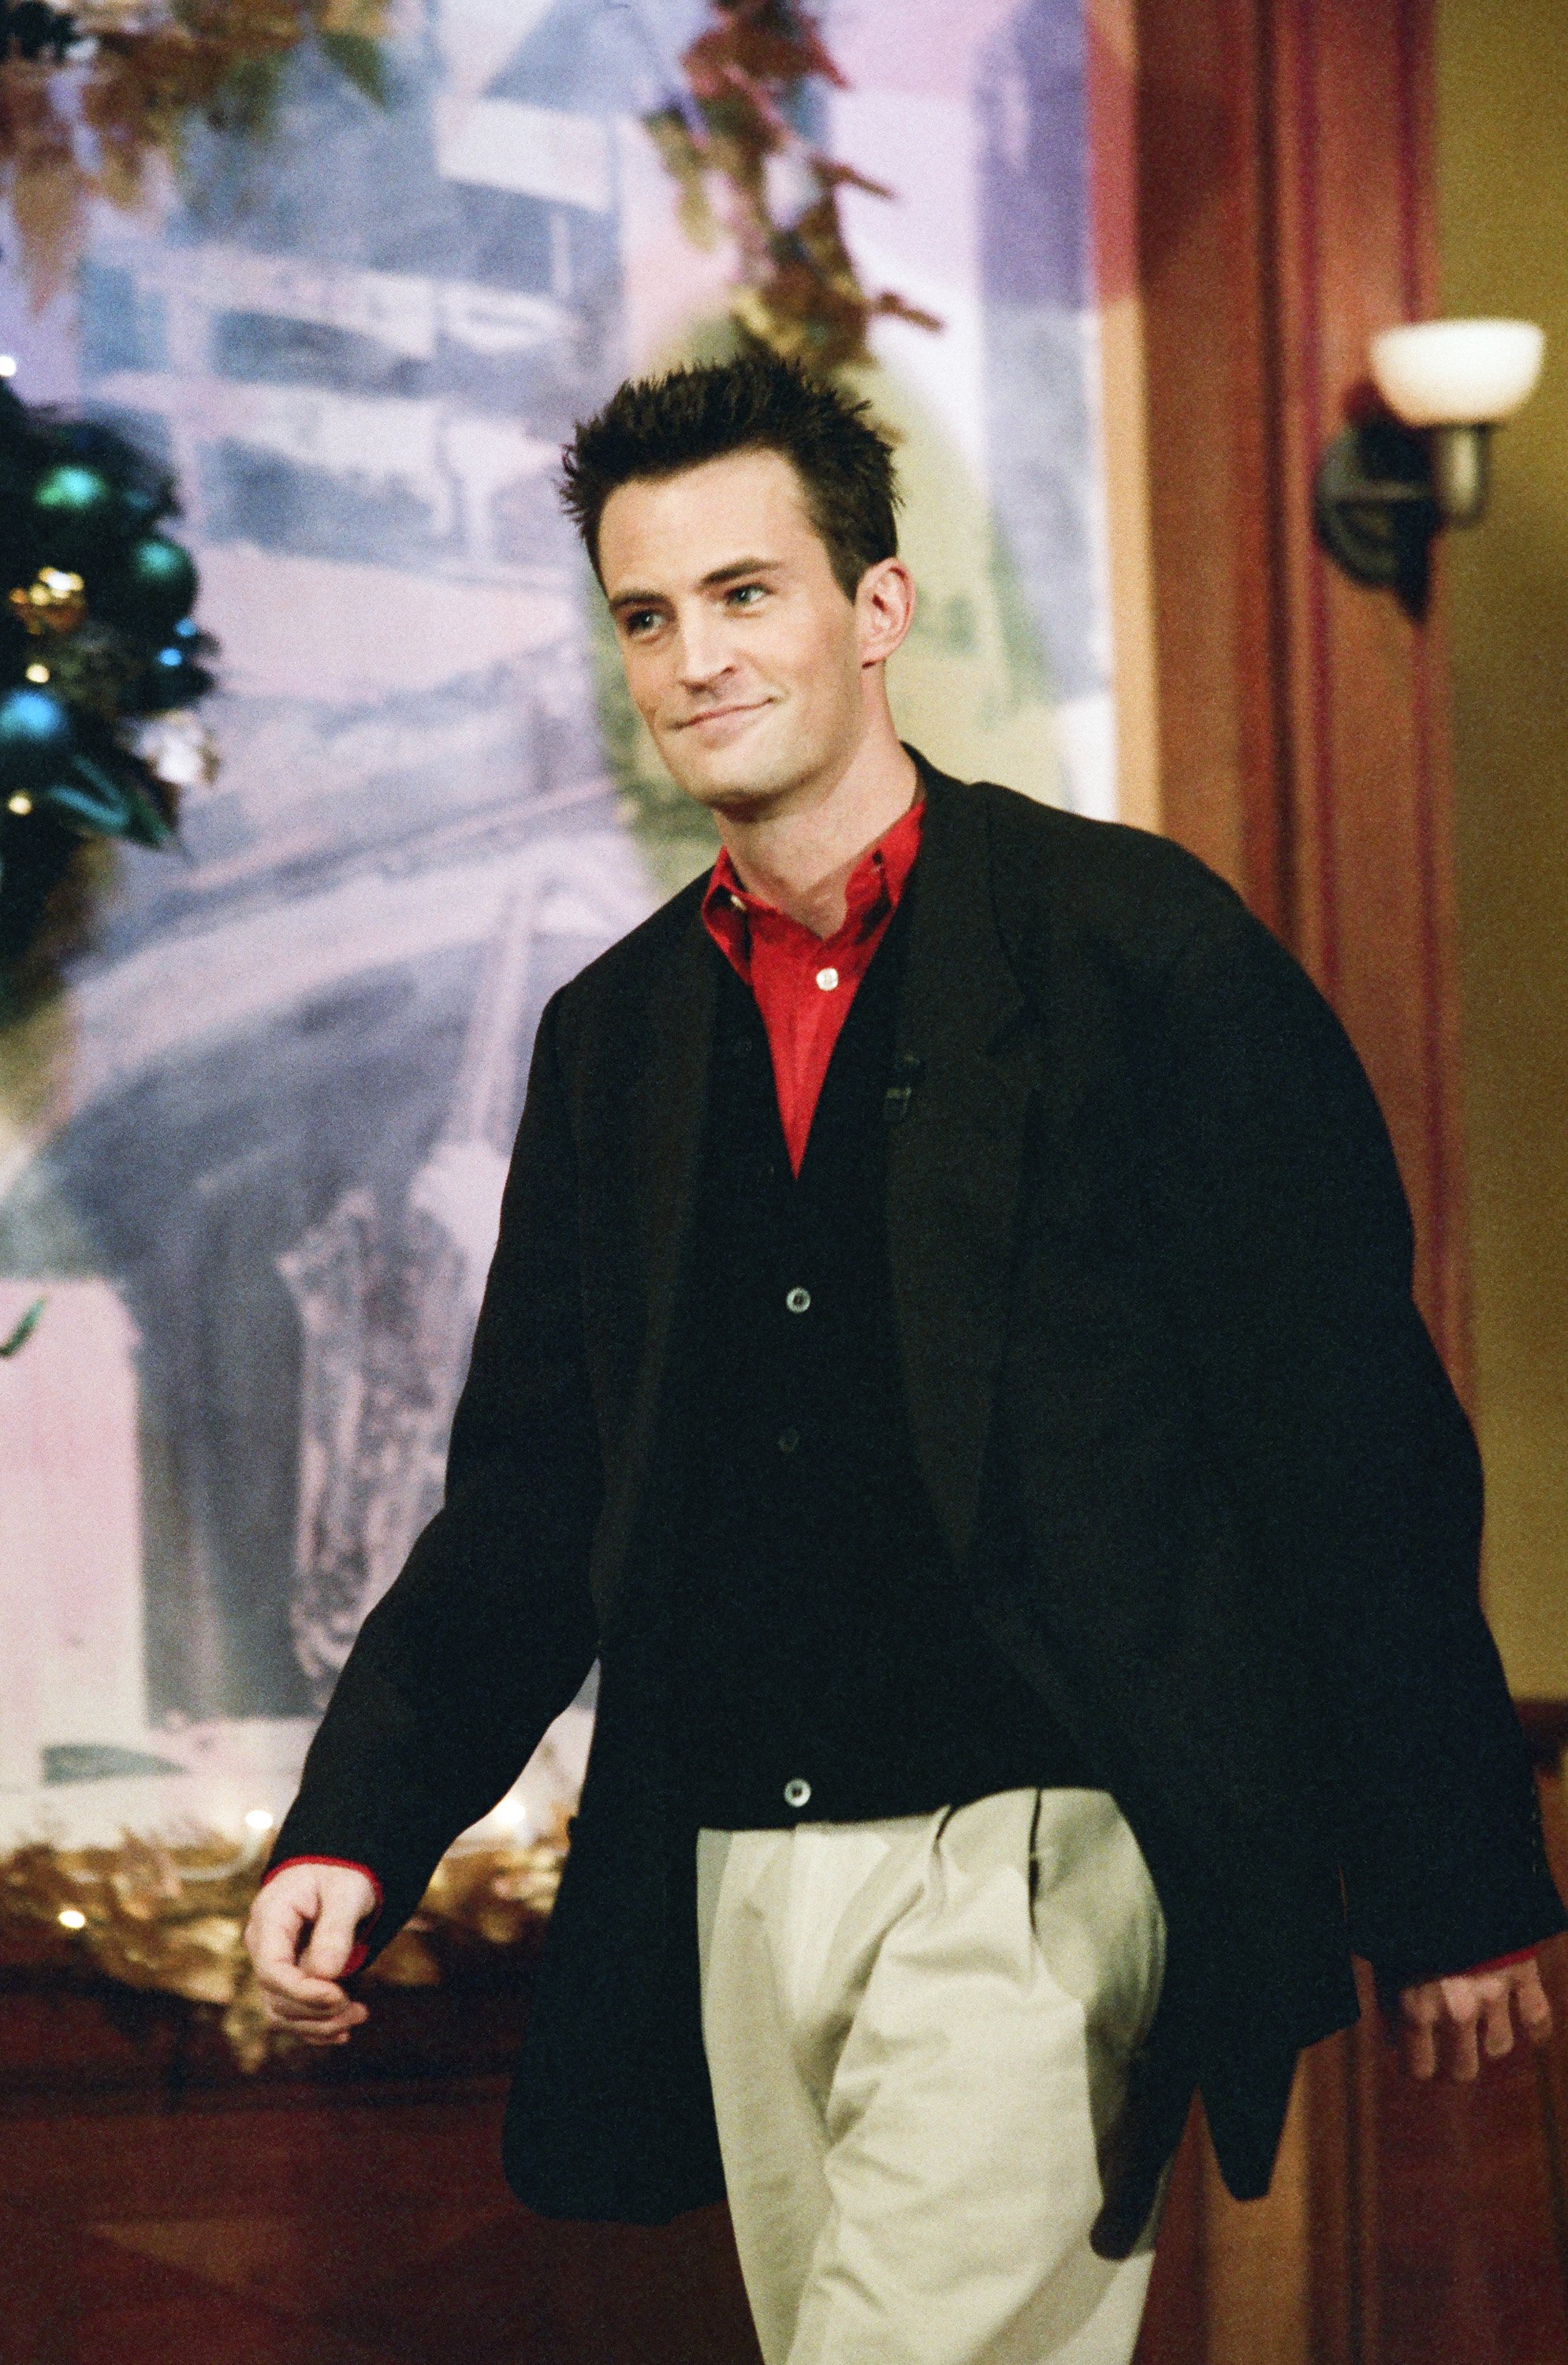 Matthew Perry during an appearance on "The Tonight Show with Jay Leno" on December 18, 1996 | Source: Getty Images